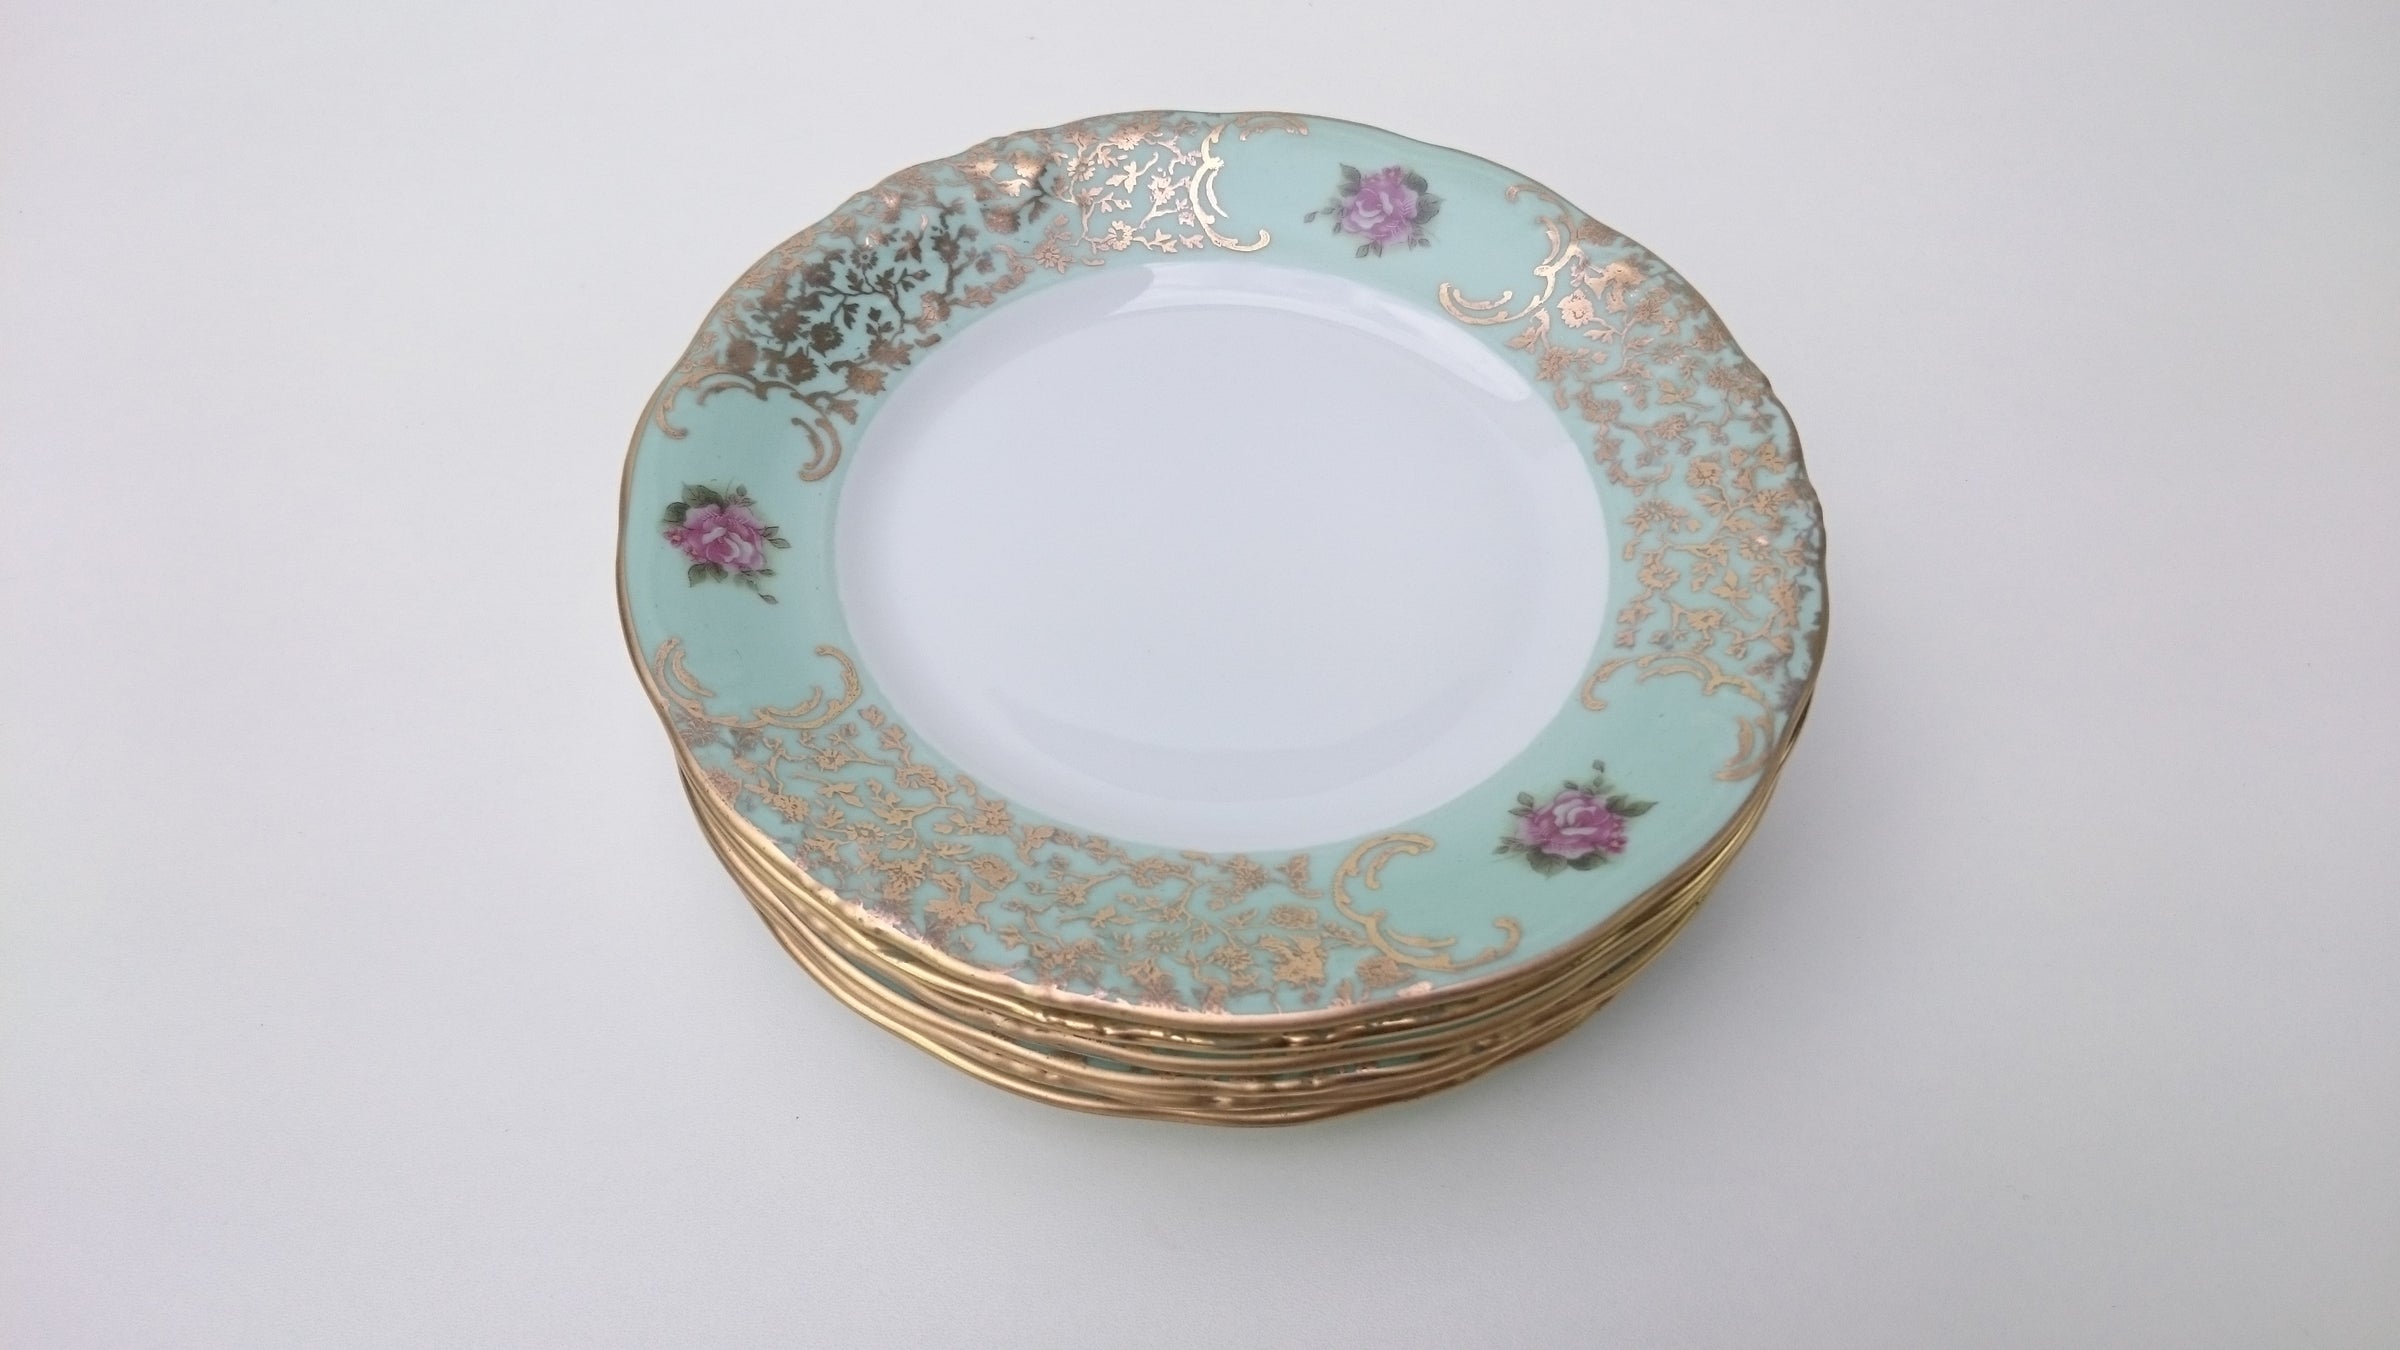 Porcelain dessert plate, Hand made in Italy - #74 Vienna , Green and gold with Rose